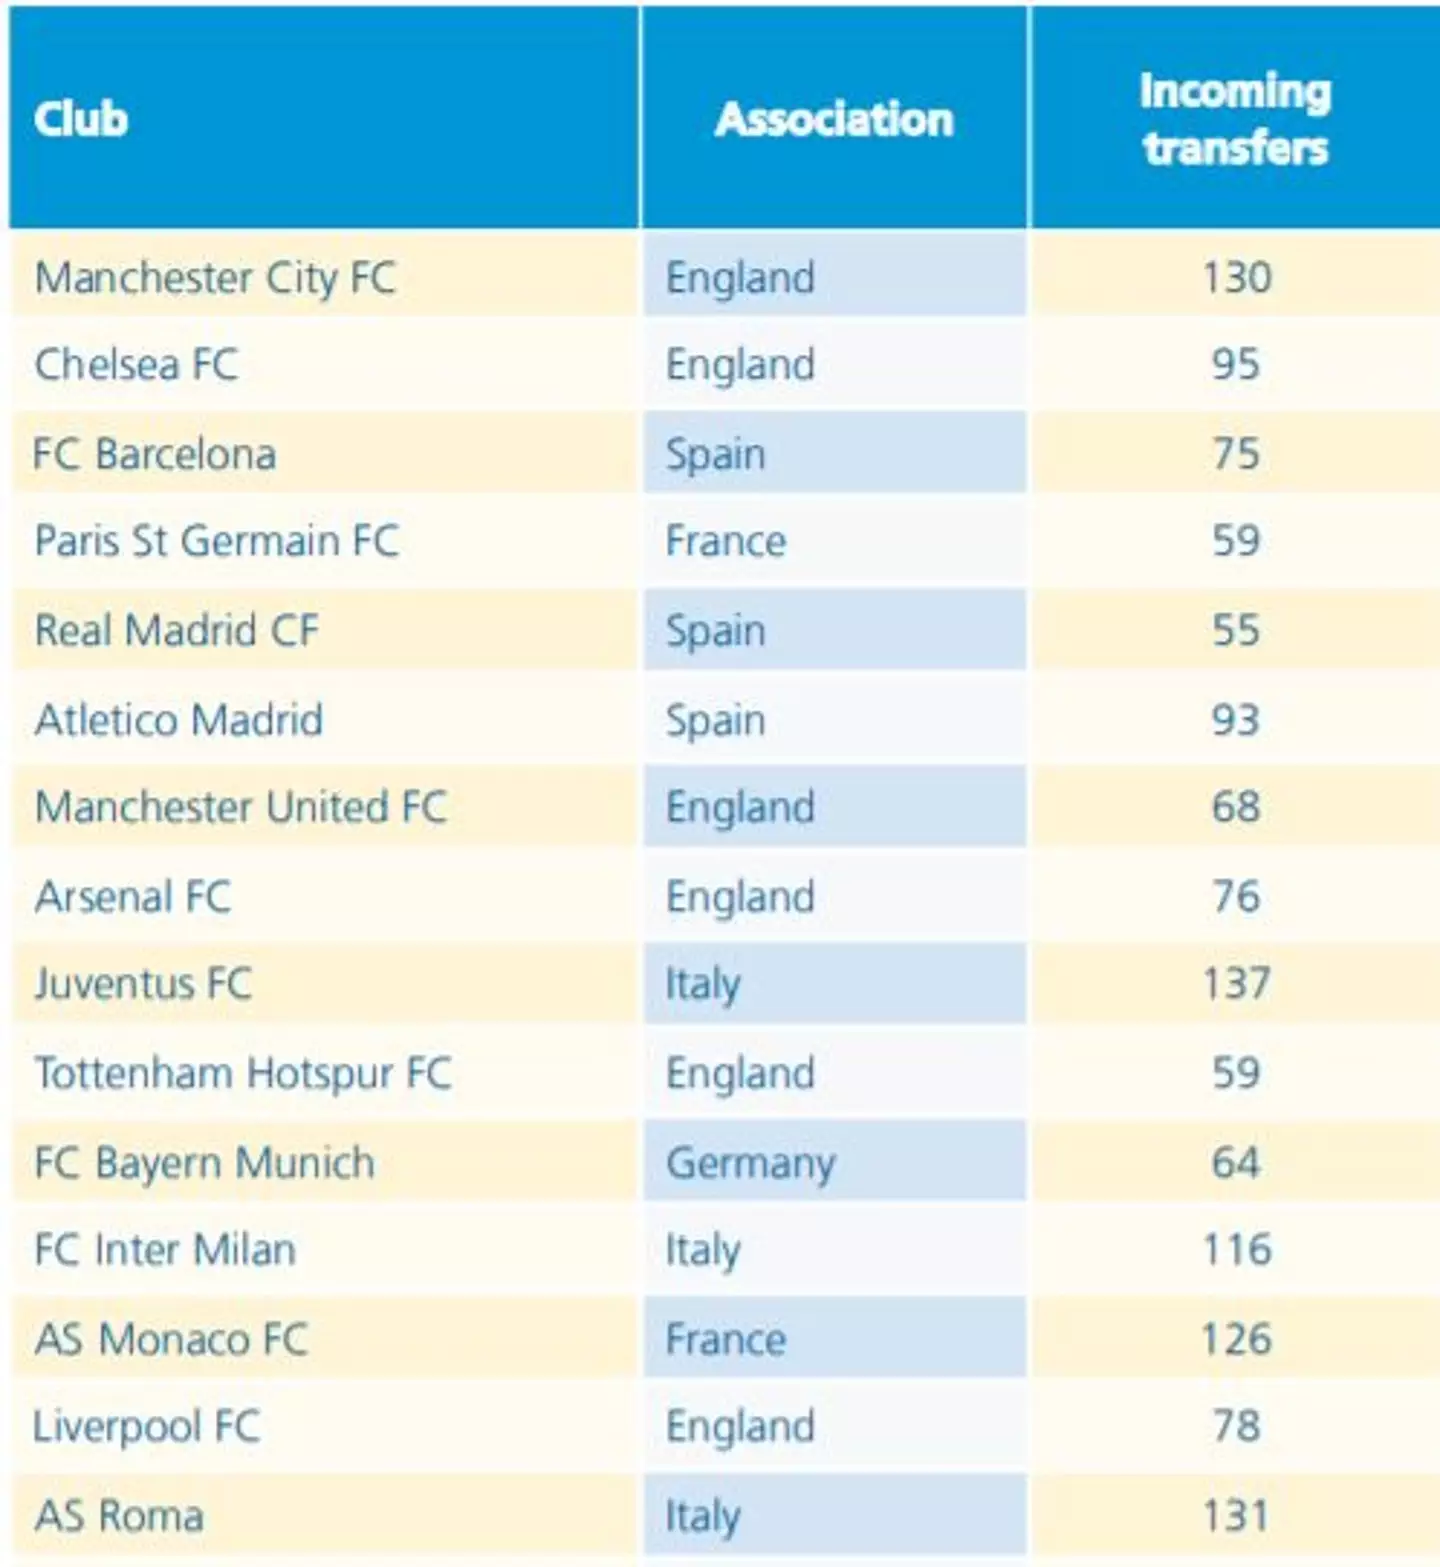 The clubs with the highest transfer fees paid. Image: FIFA.com